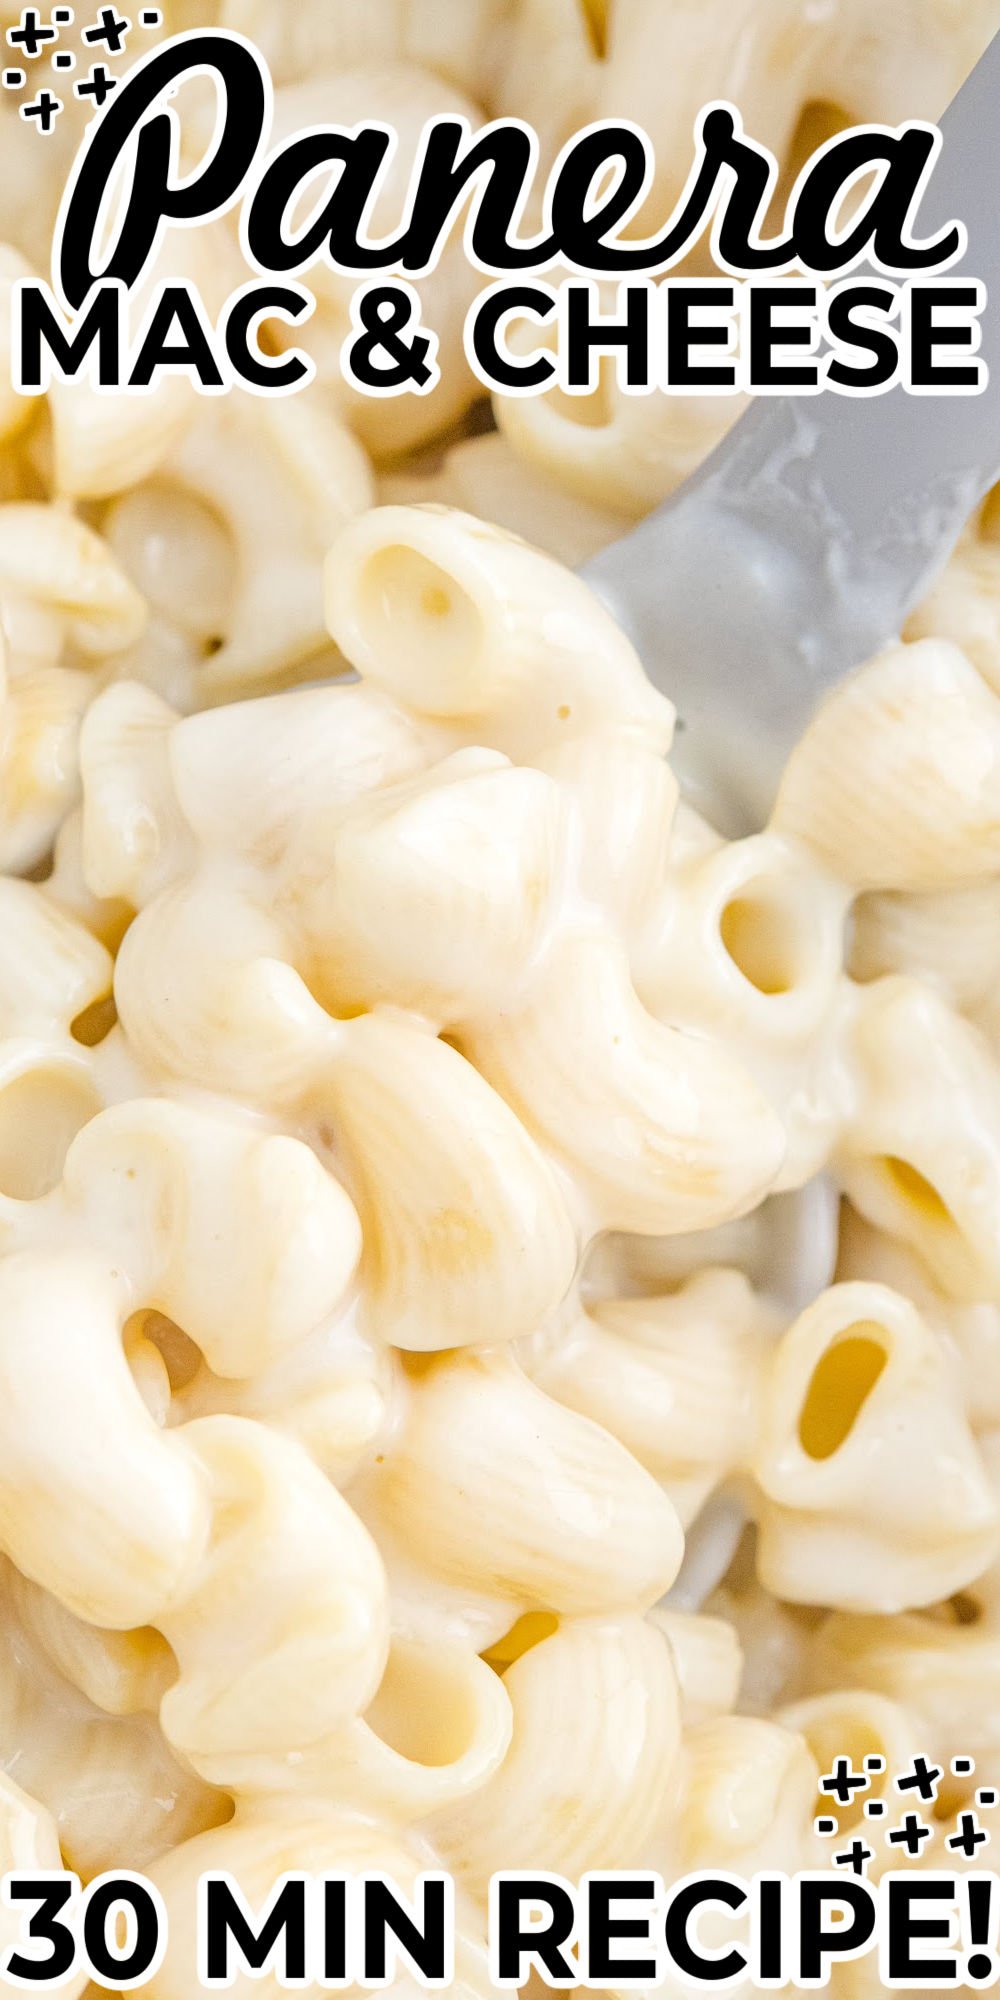 This is THE recipe for Panera Mac and Cheese. I got it from their website a while back when they posted it for a short time! You MUST try this easy stovetop recipe. via @foodfolksandfun